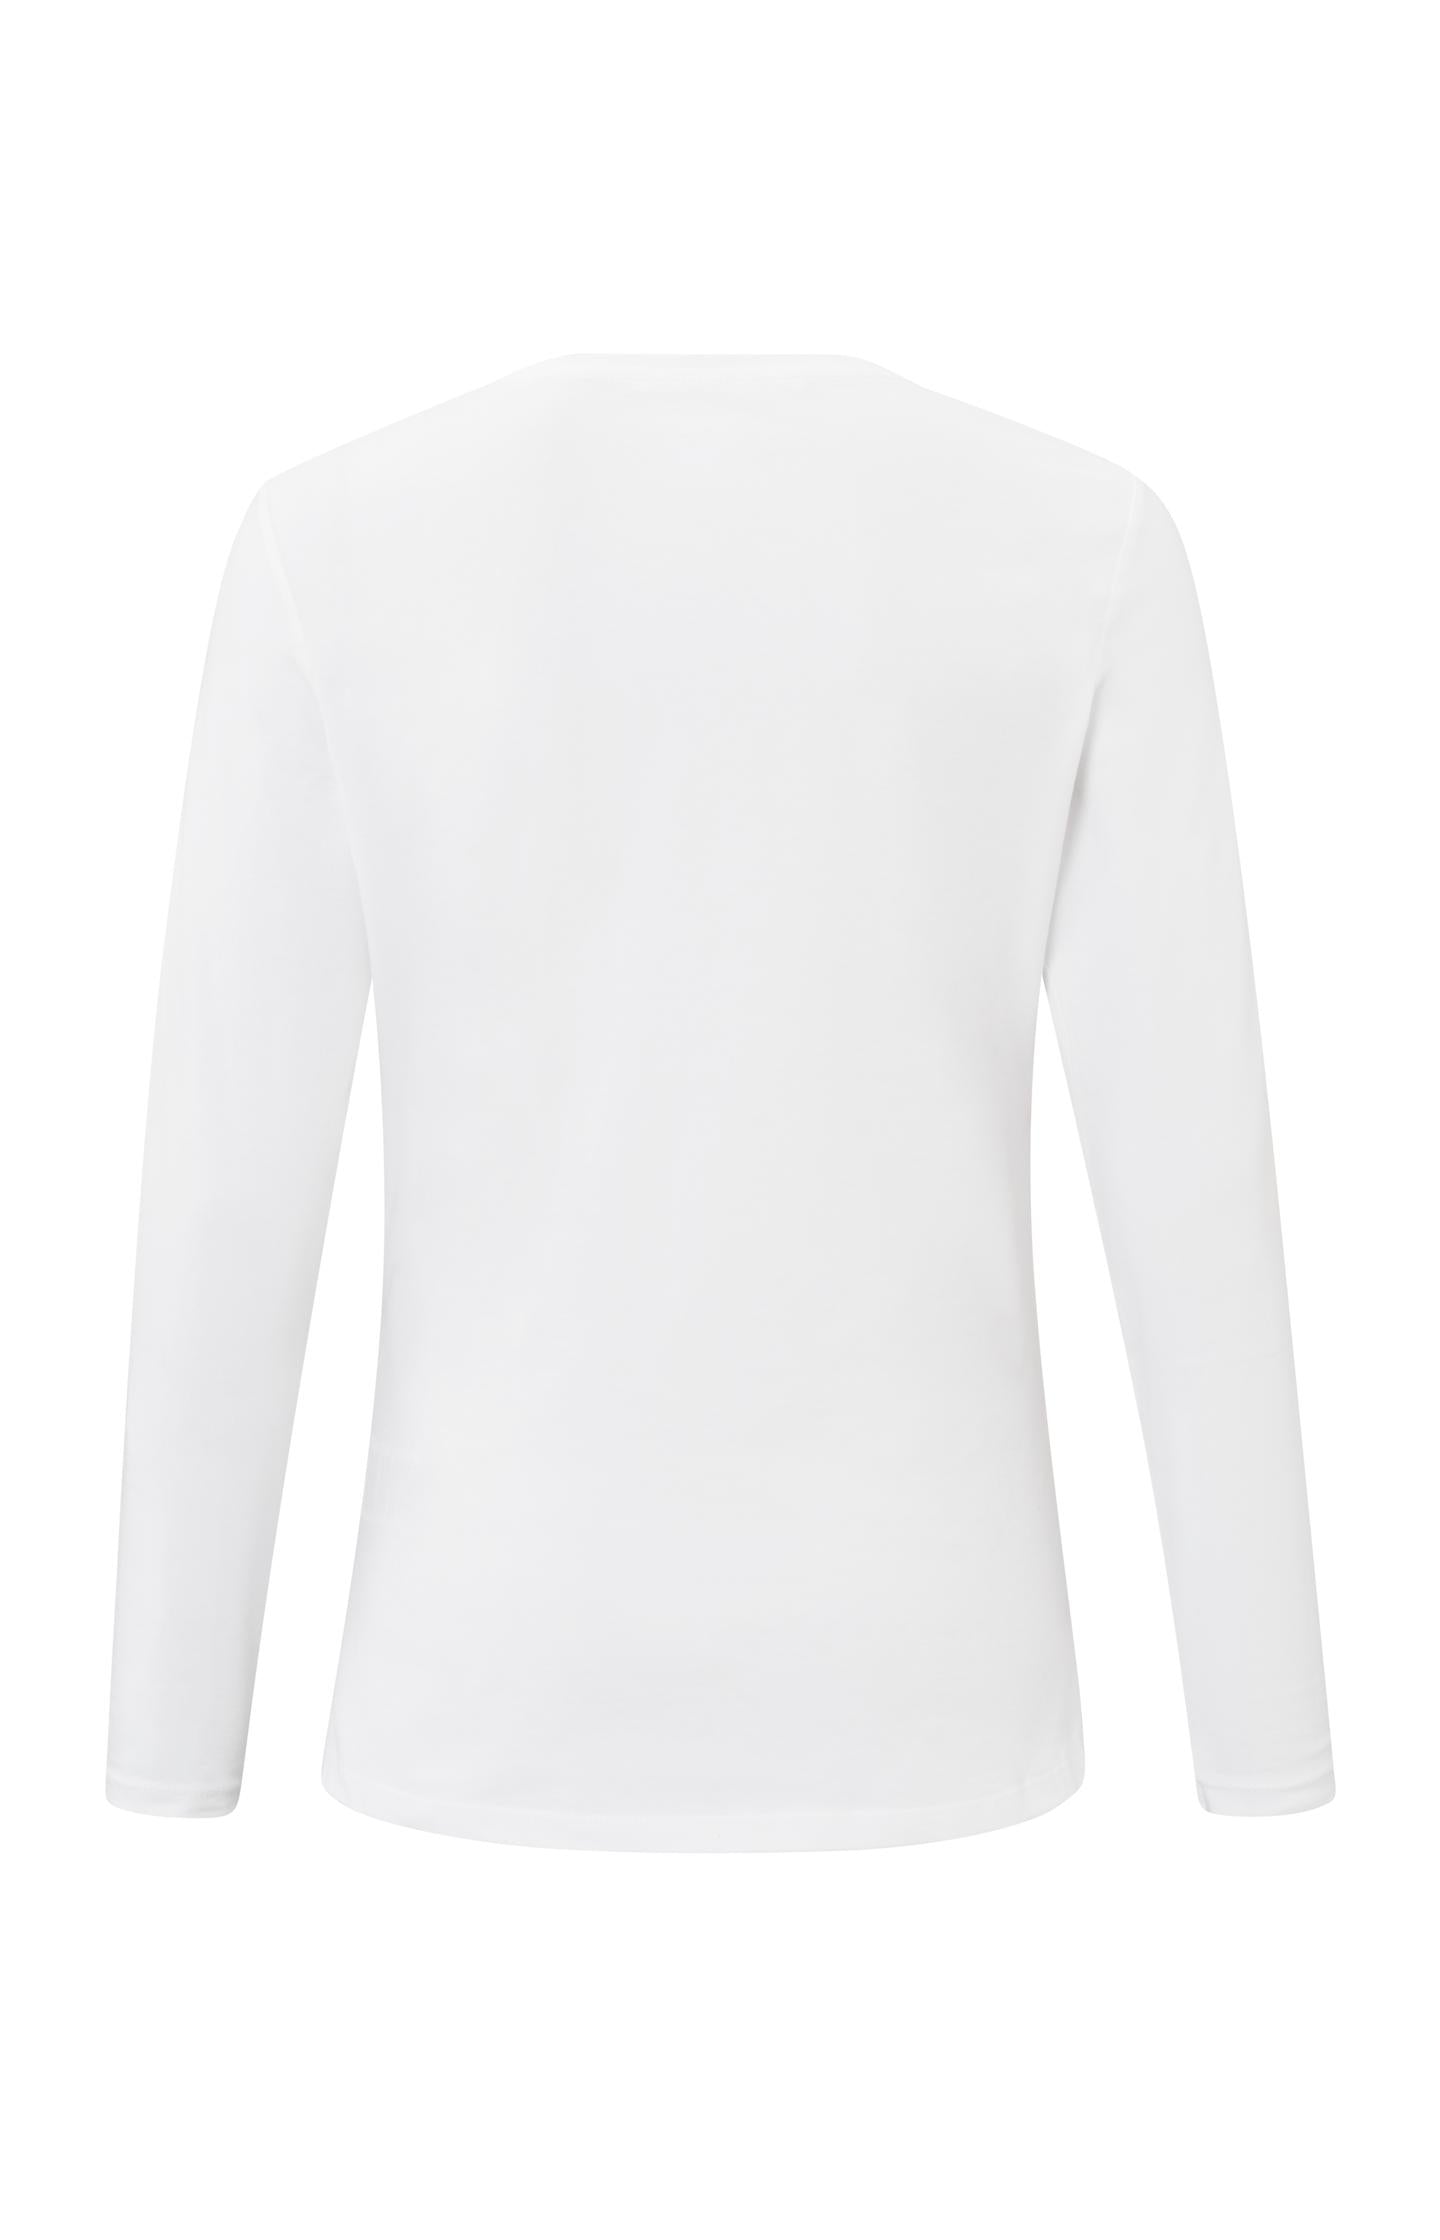 T-shirt with round neck and long sleeves in a regular fit